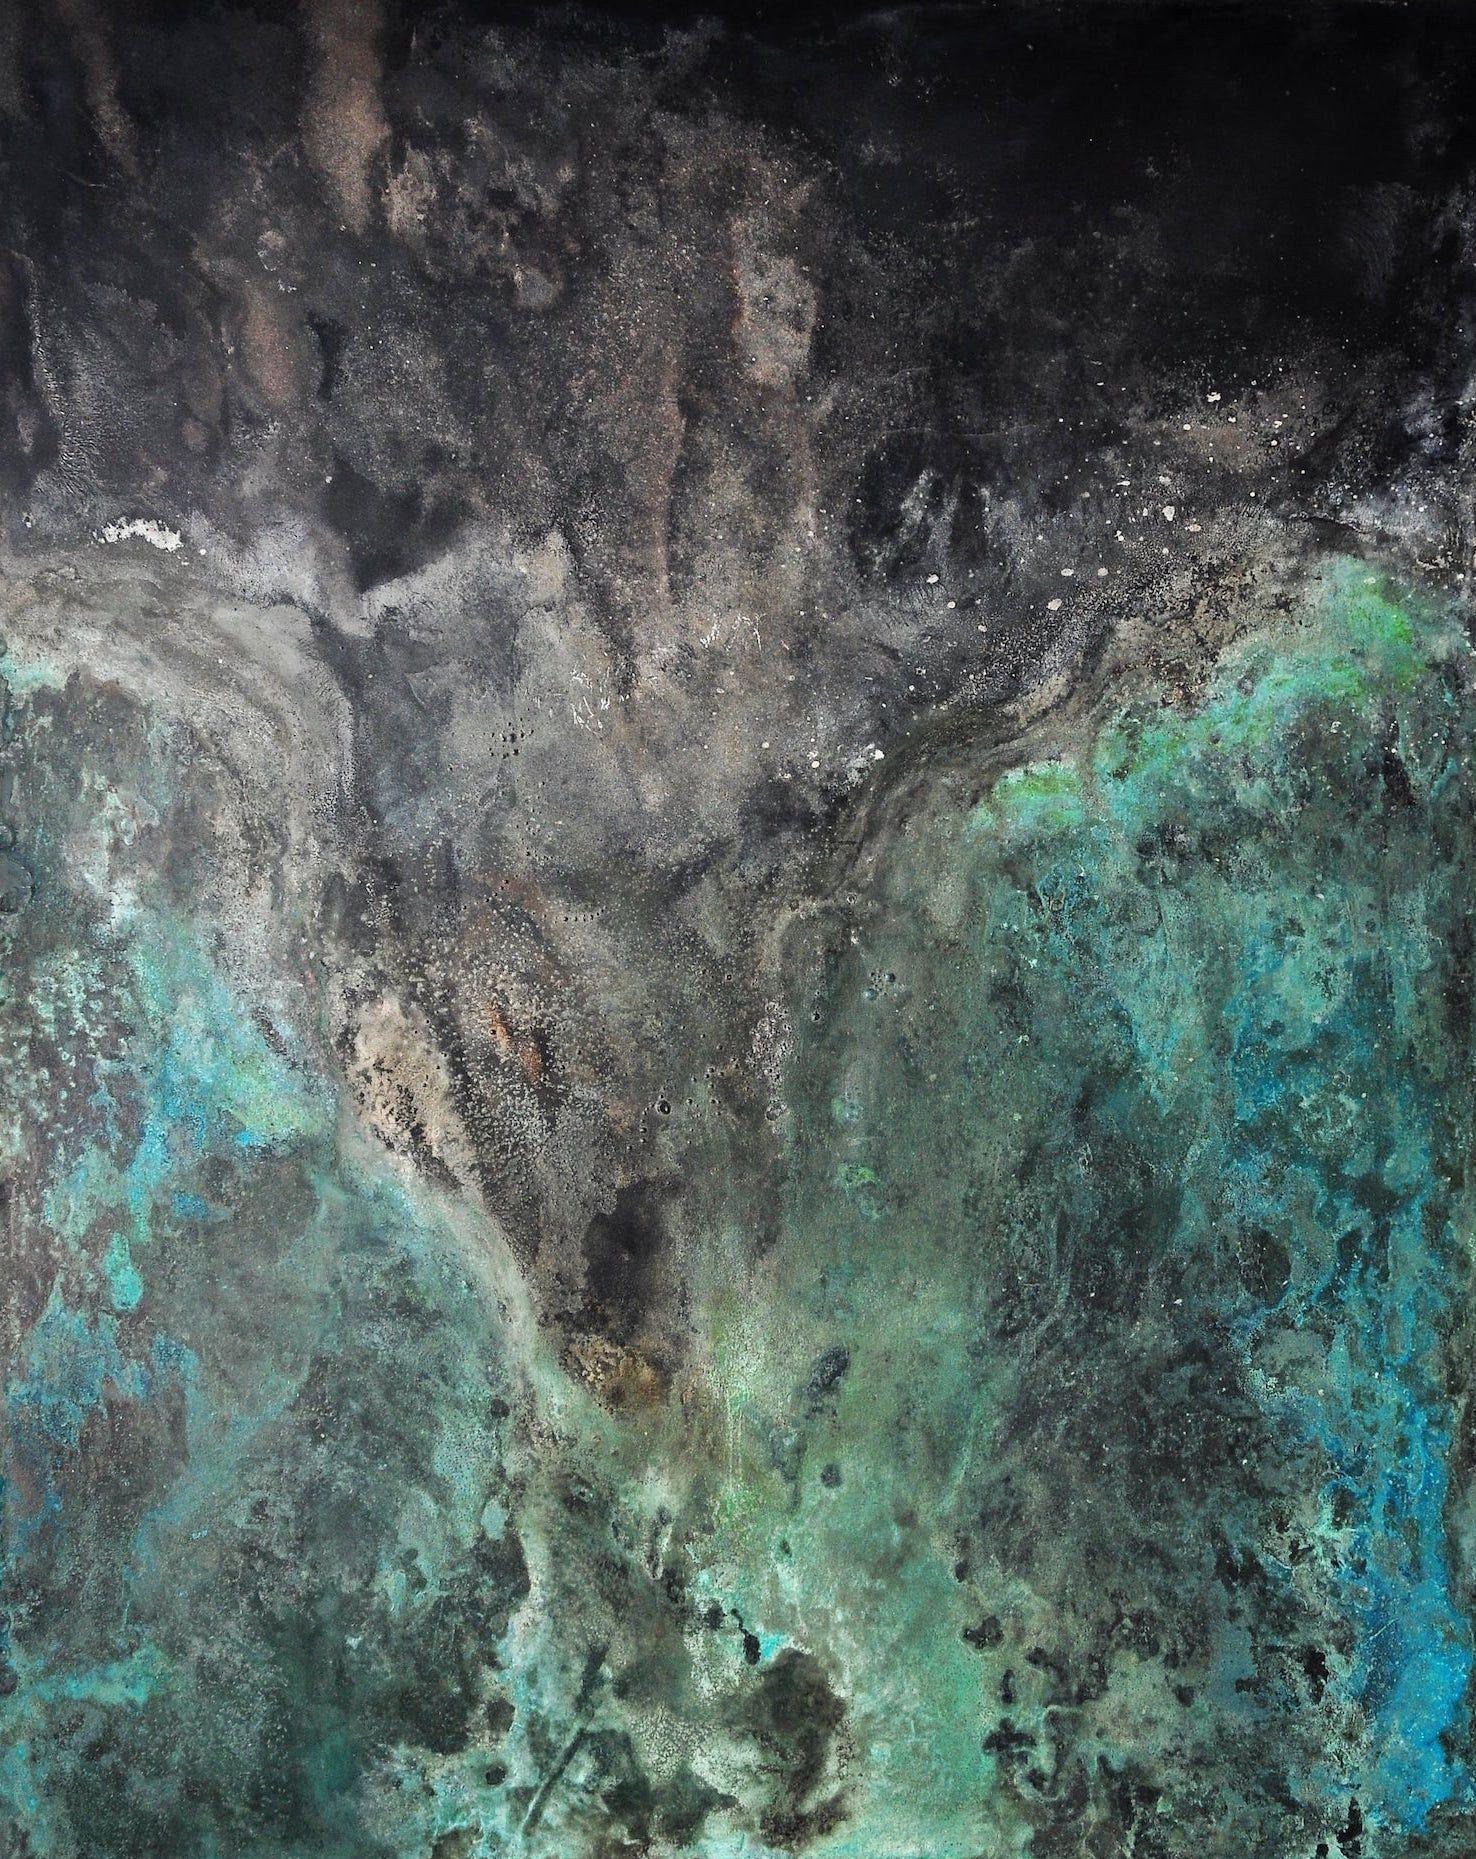 Turbulences is a unique painting by French contemporary artist Frédérique Domergue. This painting is made with oxidized zinc and bronze leaves on aluminium panel, patina fixed with beeswax, dimensions are 100 × 80 cm (39.4 × 31.5 in).
The artwork is